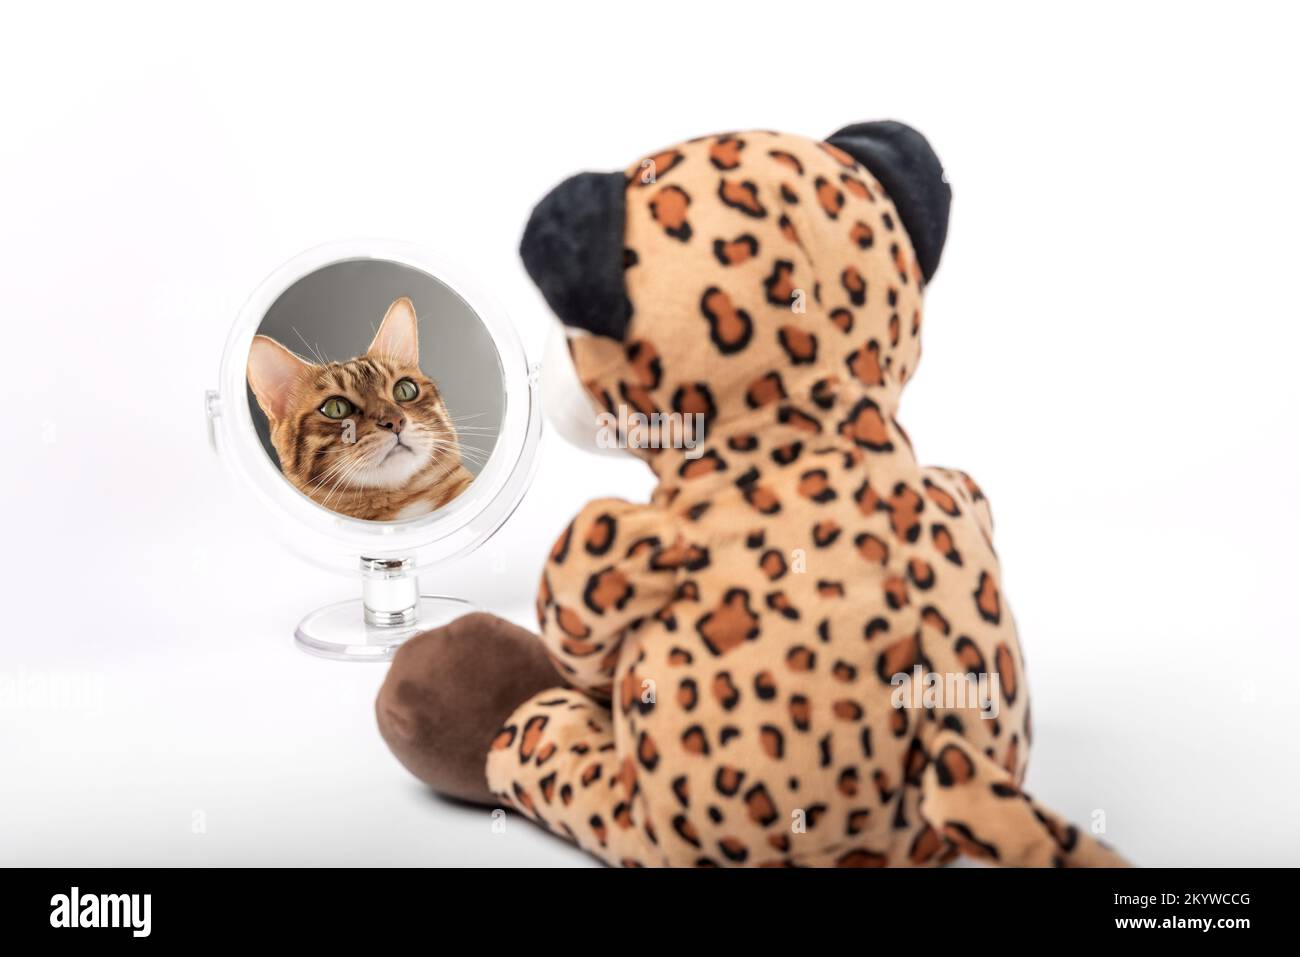 Plush toy leopard looks in the mirror and sees the face of a cat on a white background. Stock Photo